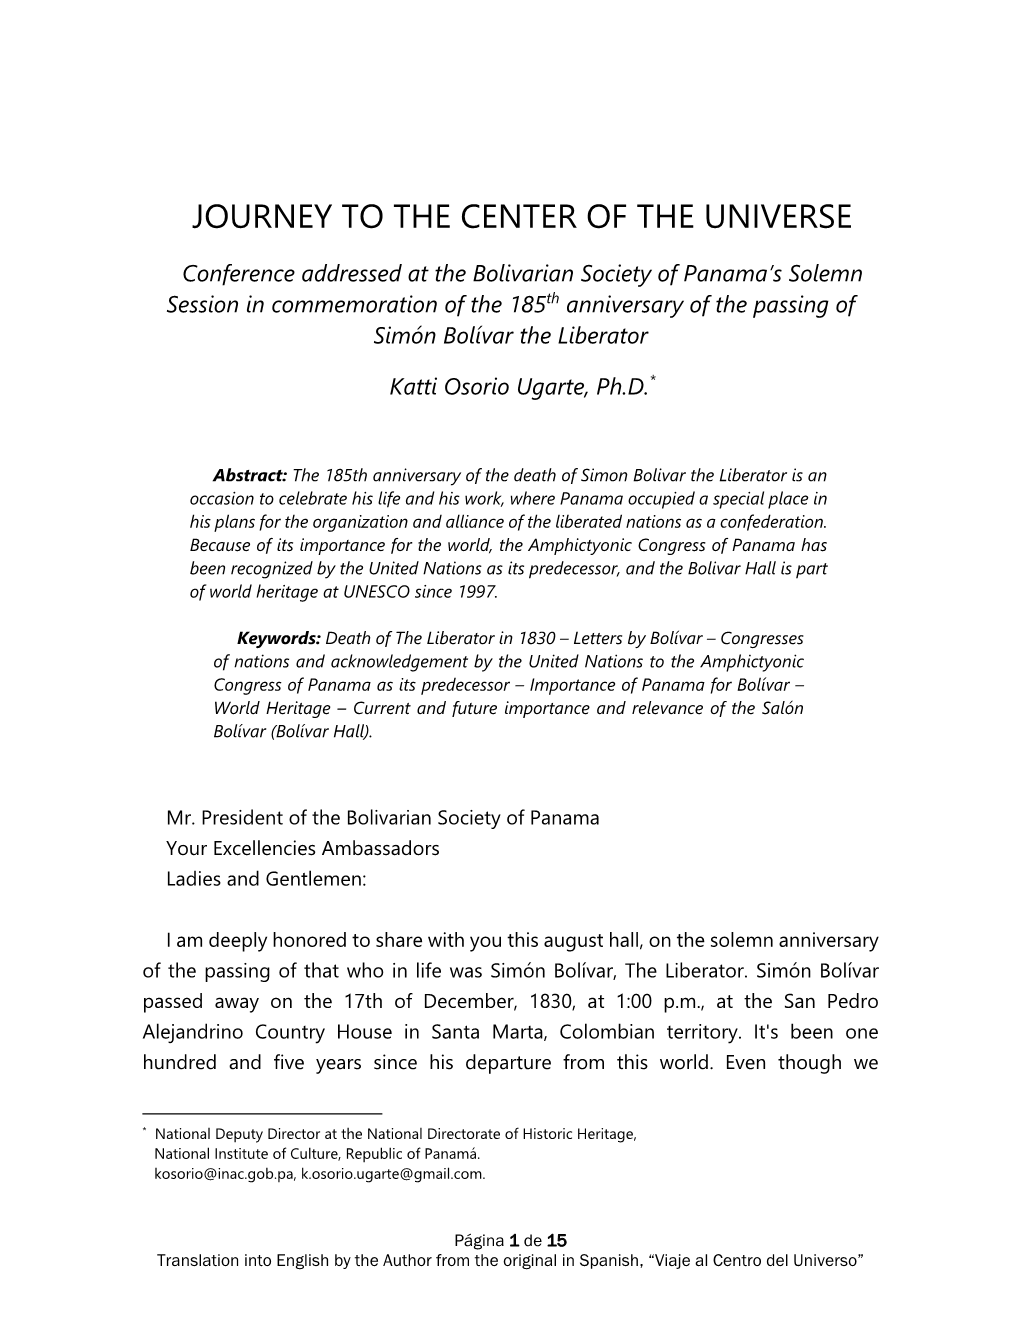 Journey to the Center of the Universe